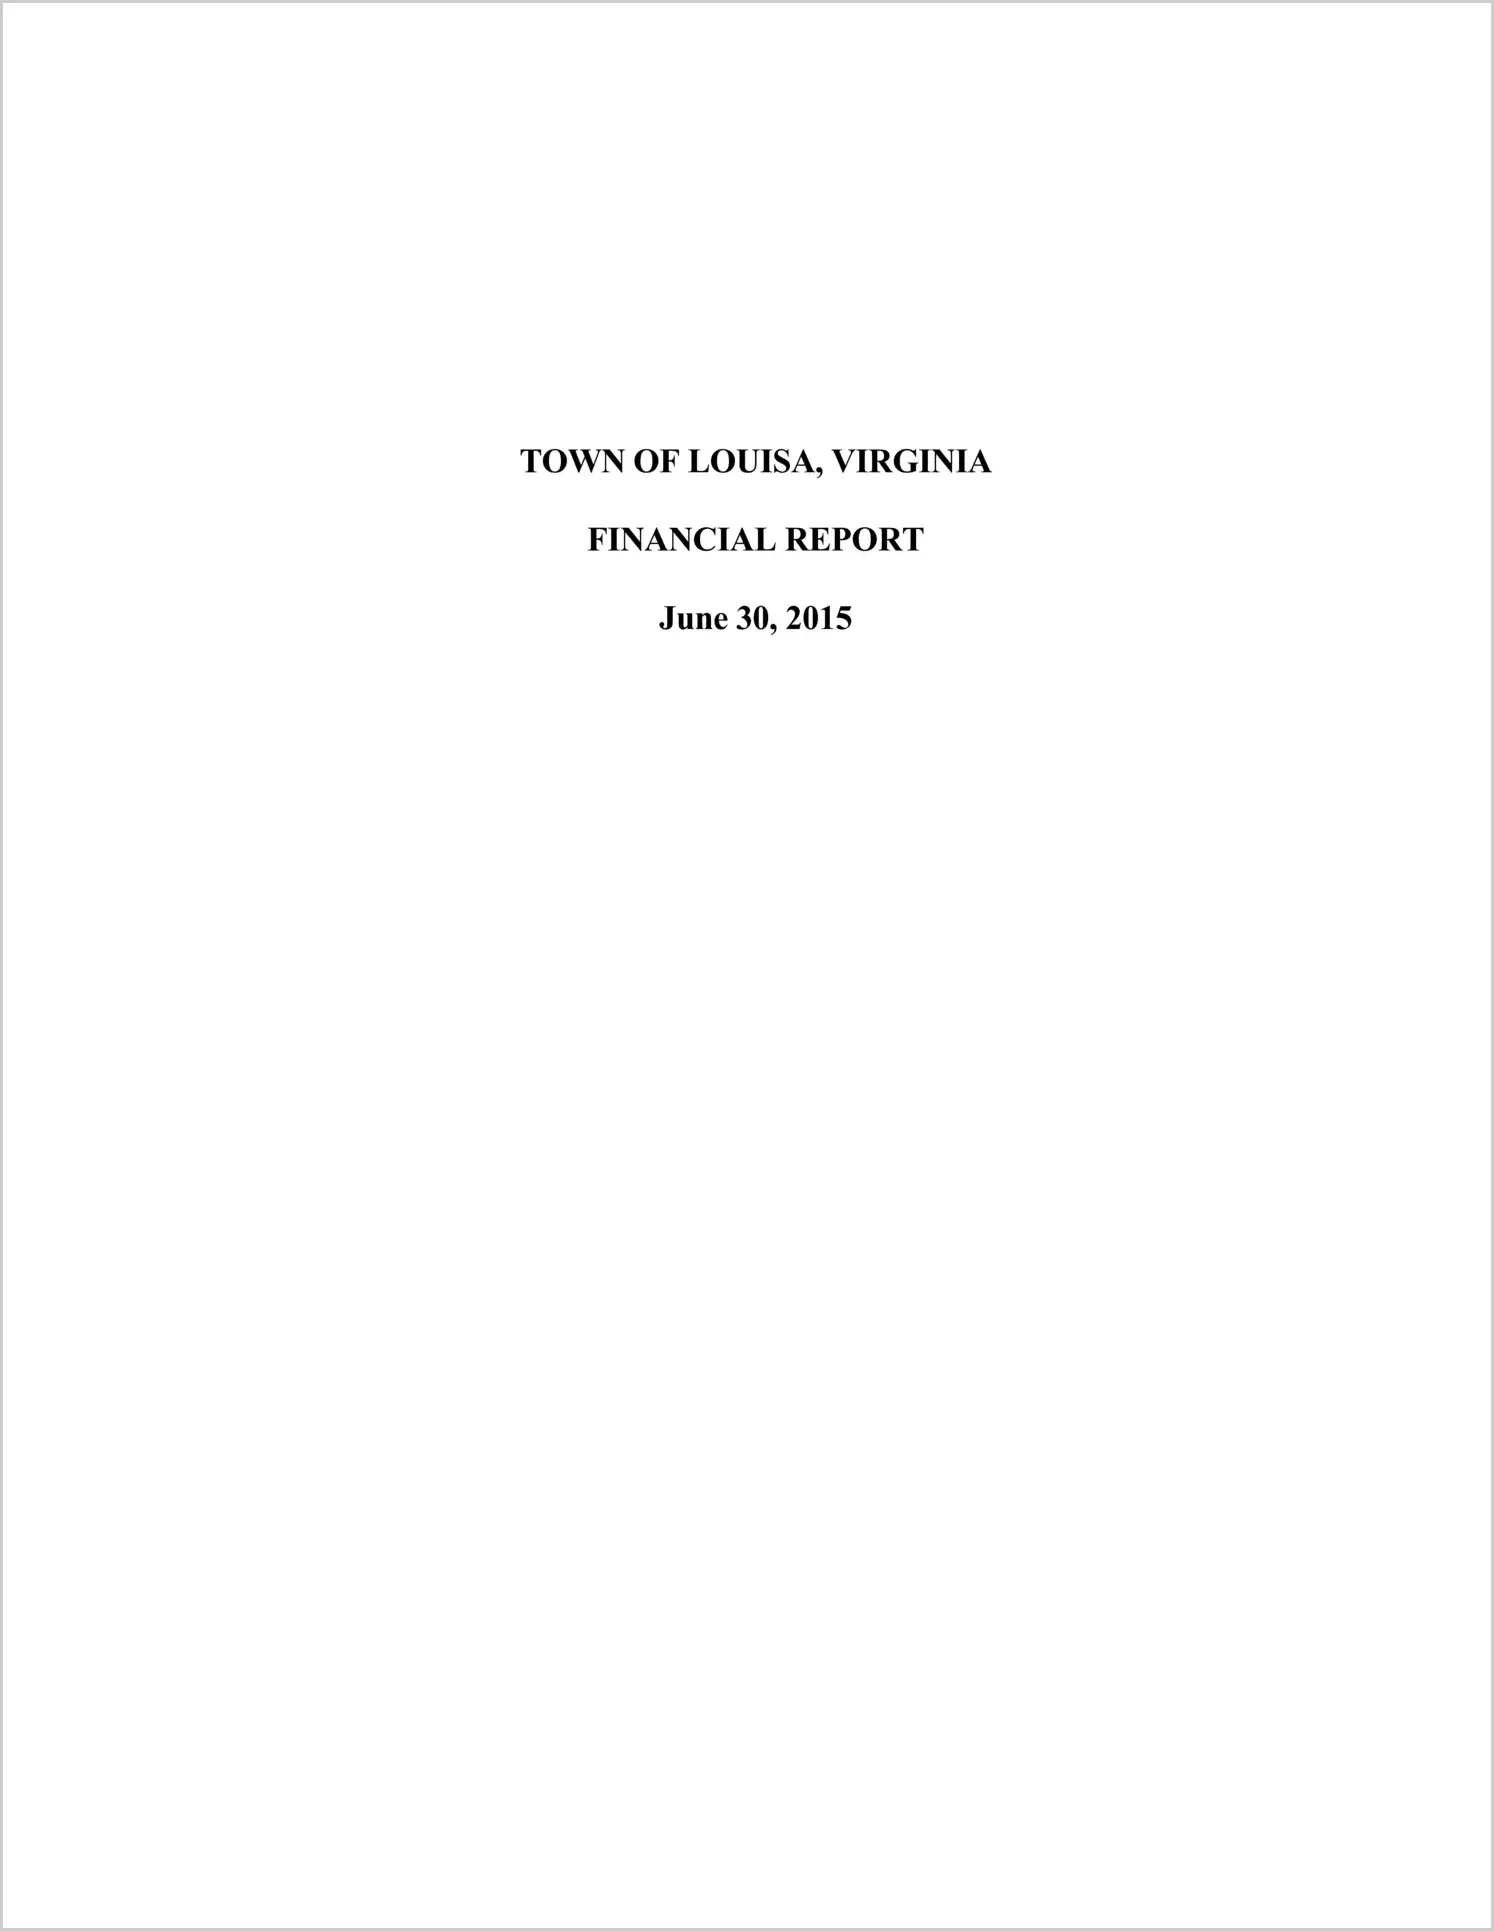 2015 Annual Financial Report for Town of Louisa